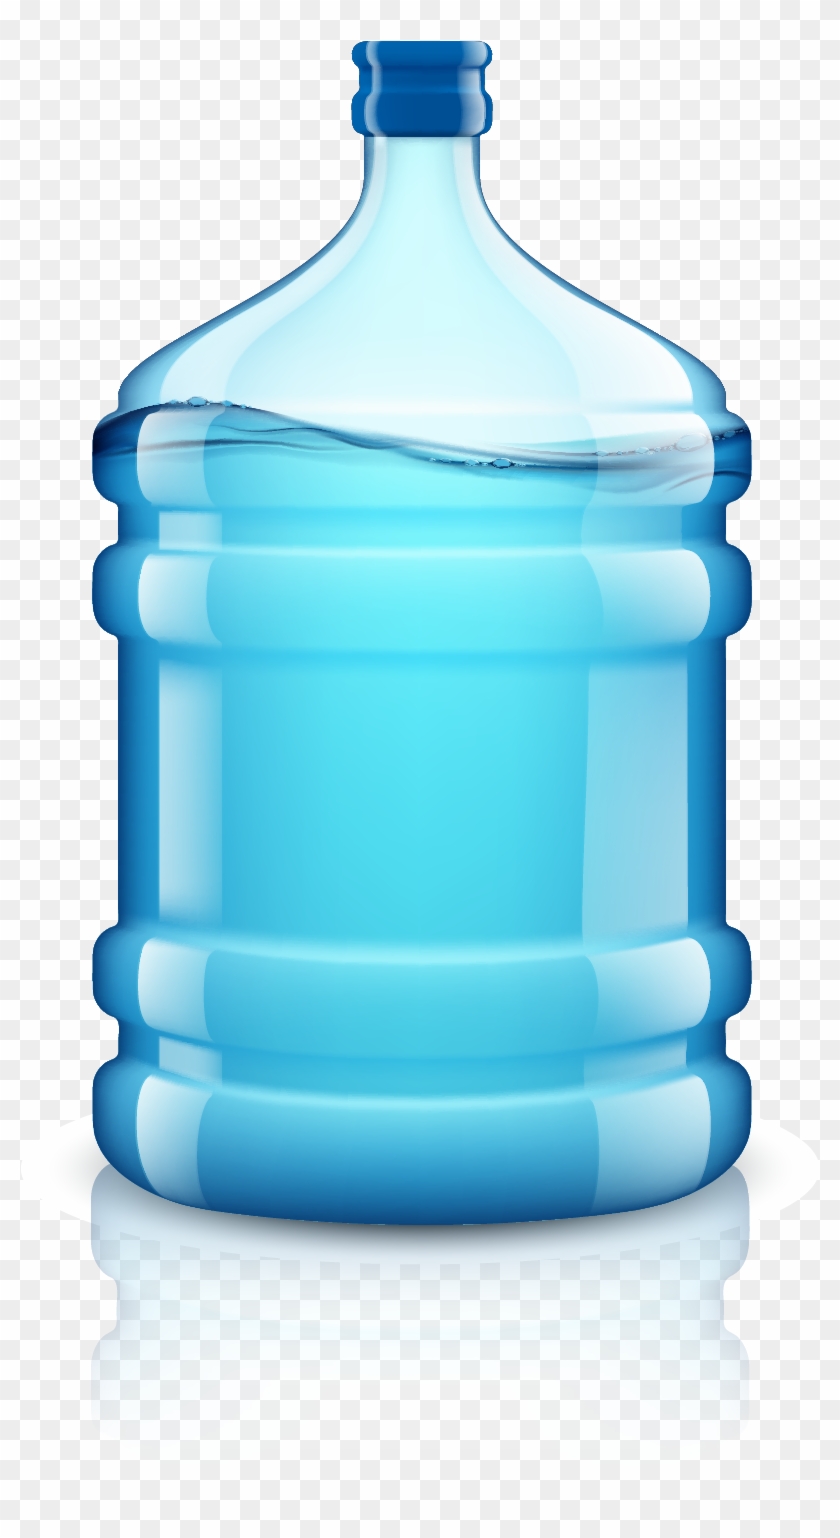 Vector Illustration Of A Pure Water Bottle On A Transparent